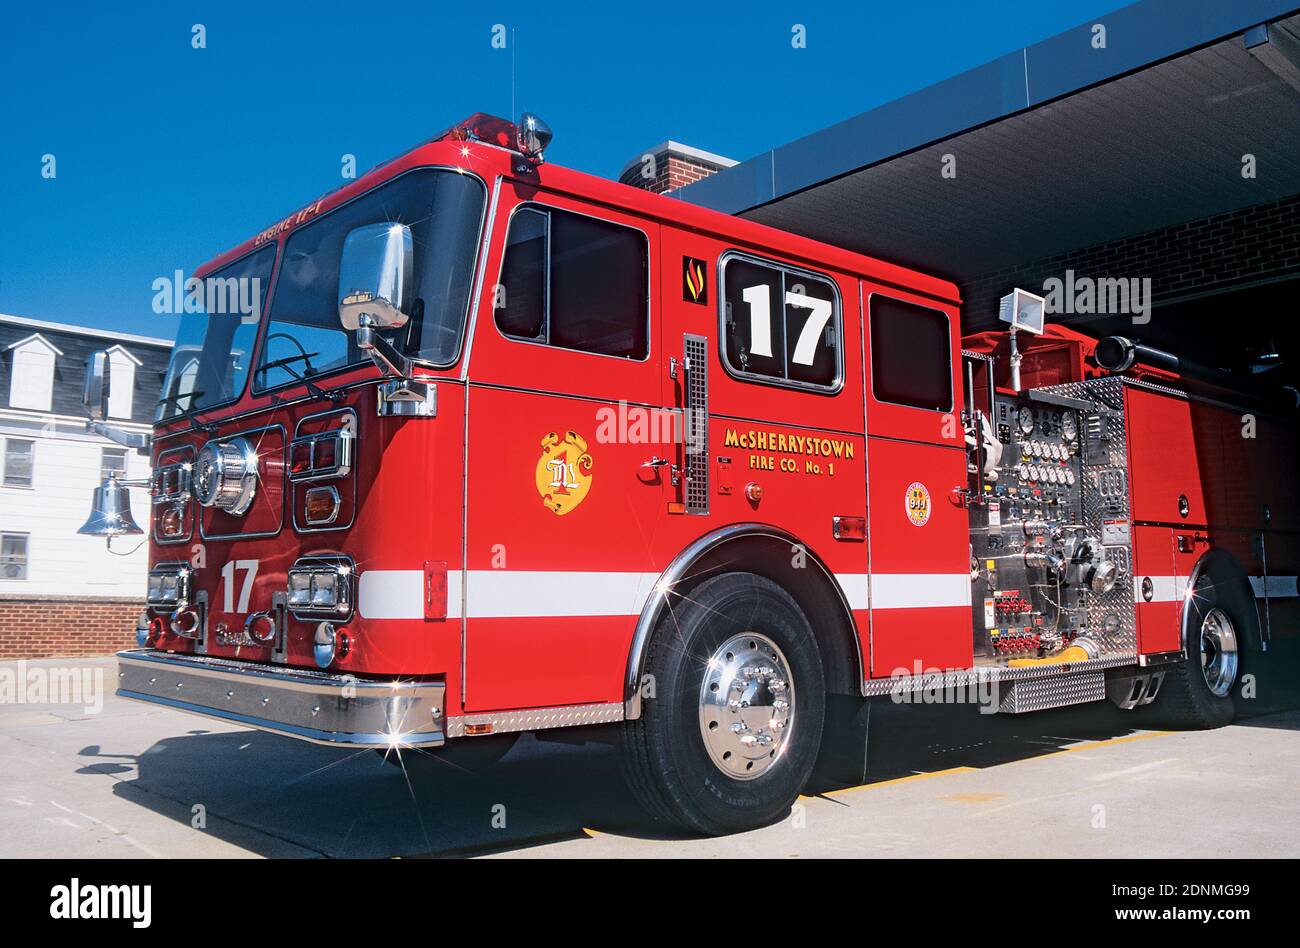 Shiny Red Fire Truck Stock Photo